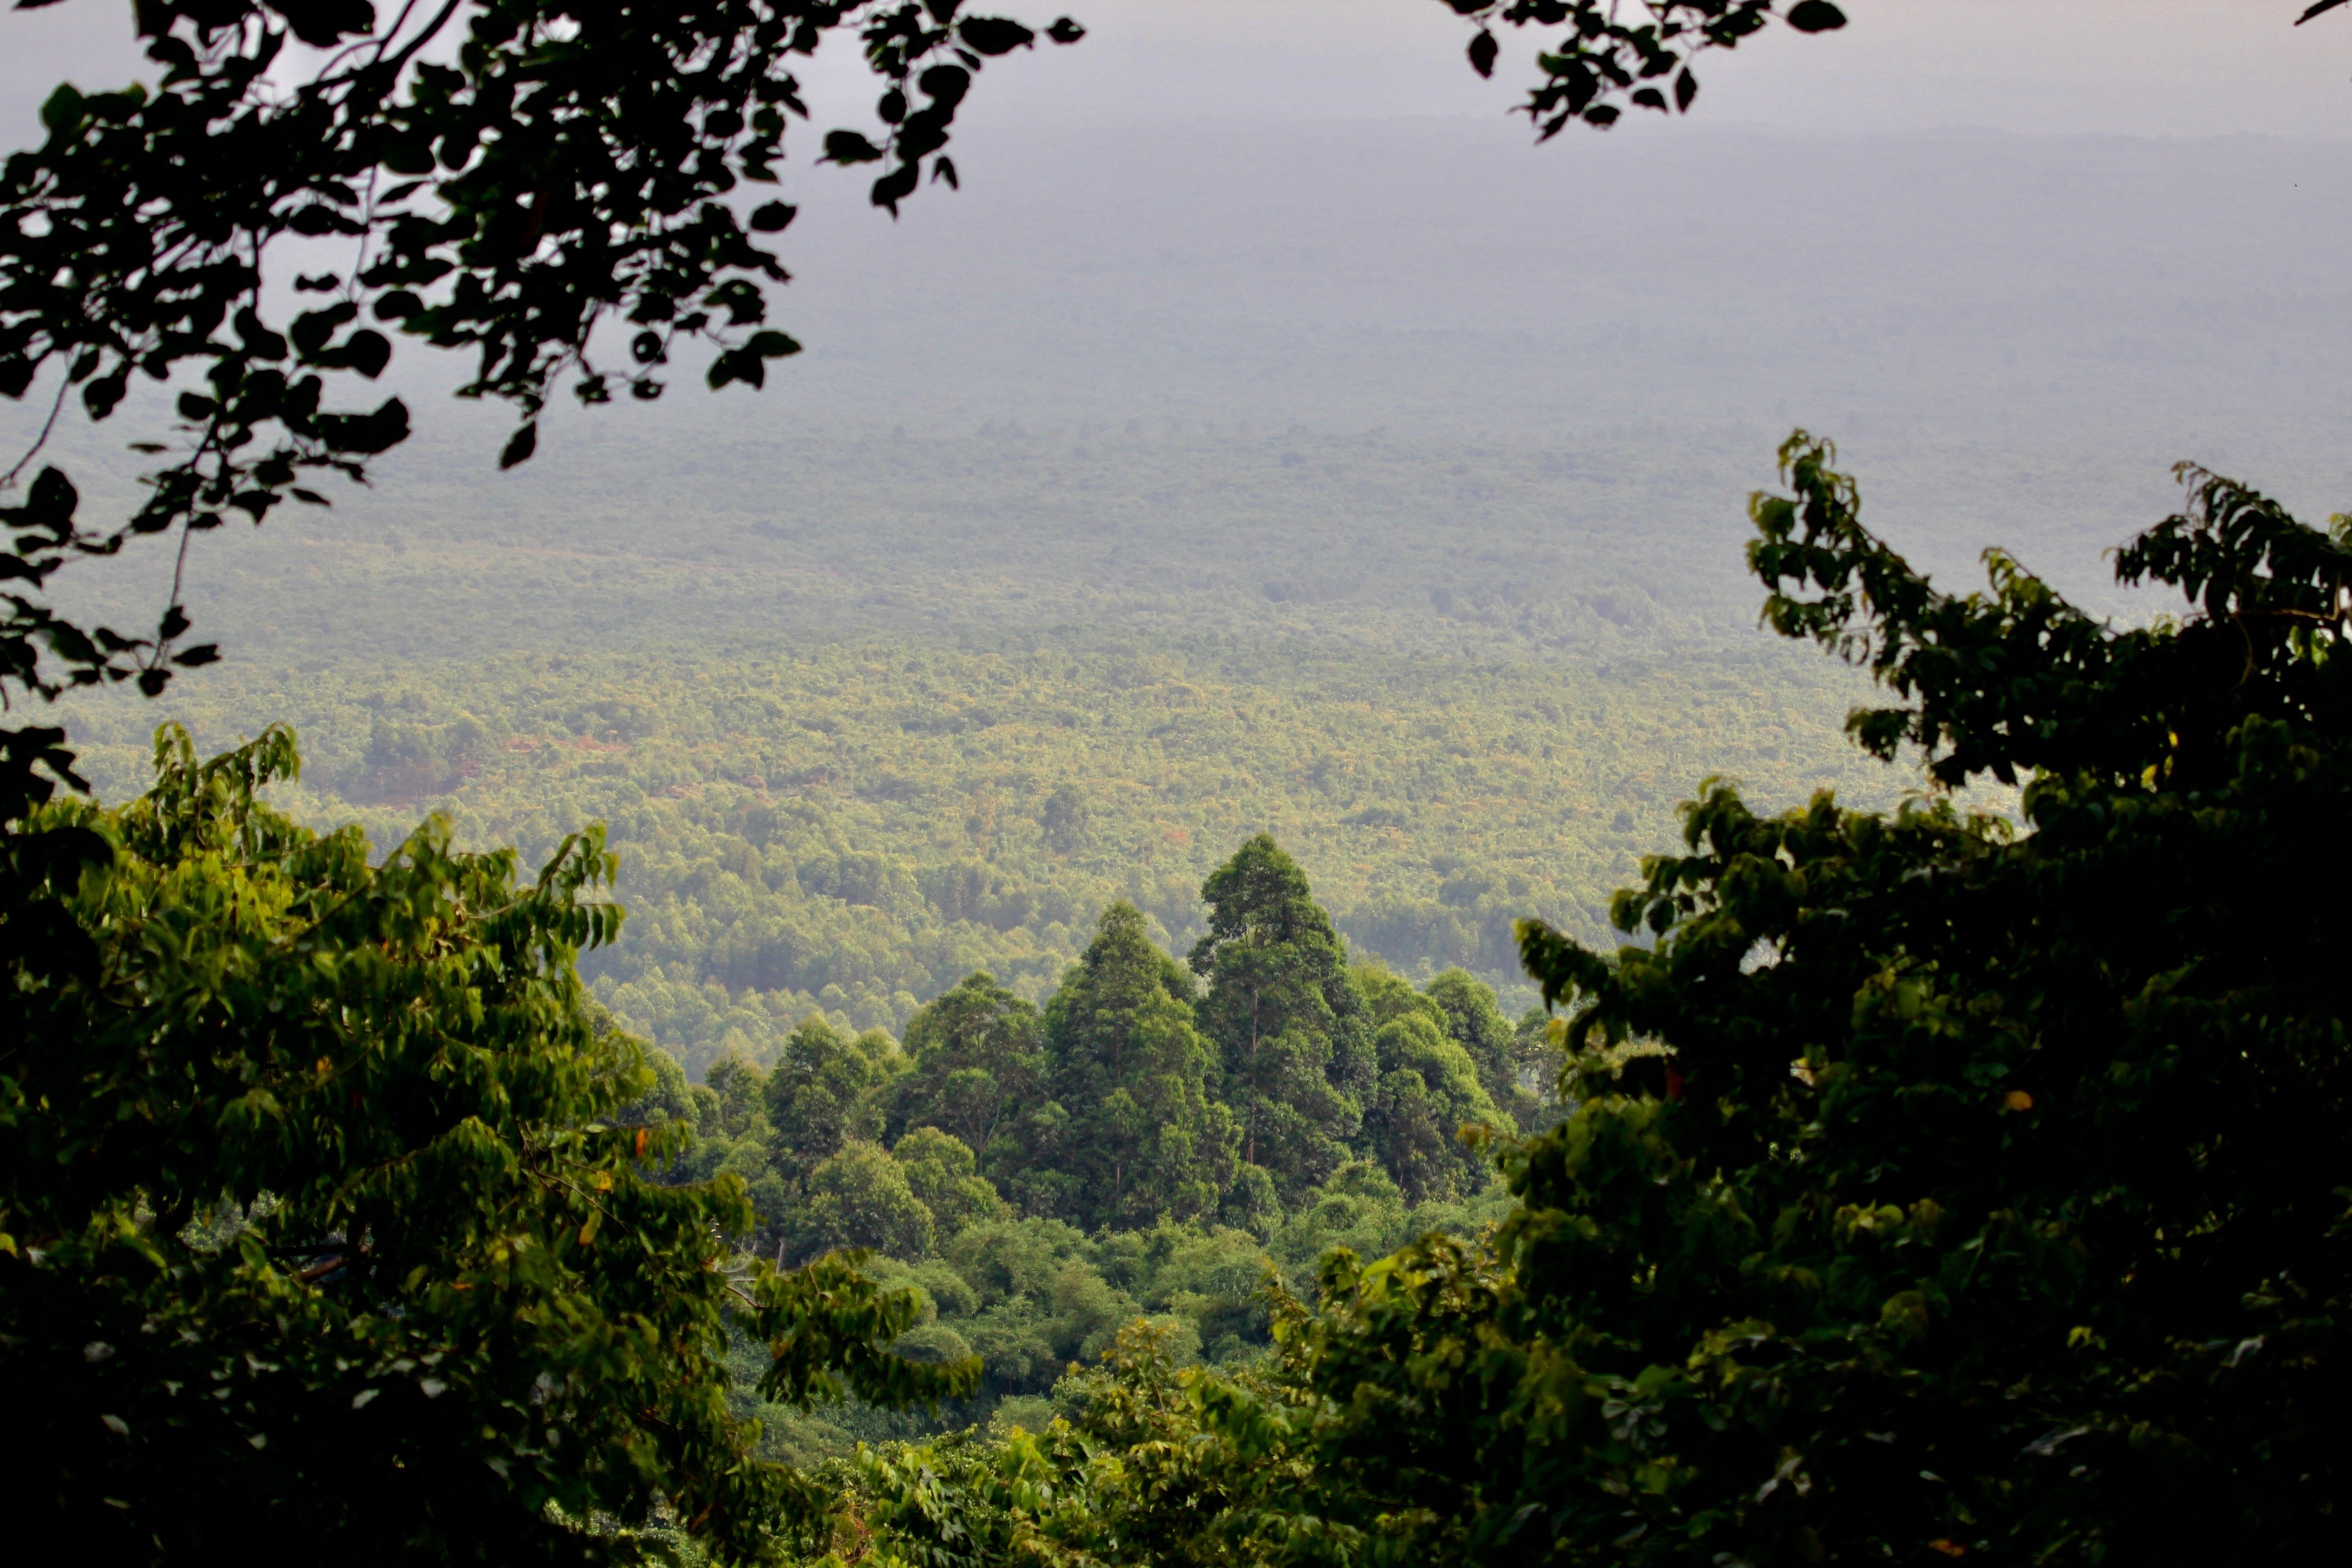 A view of the rainforest in the DRC. Image by Kiki Dohmeier / Shutterstock. Democratic Republic of the Congo, undated.